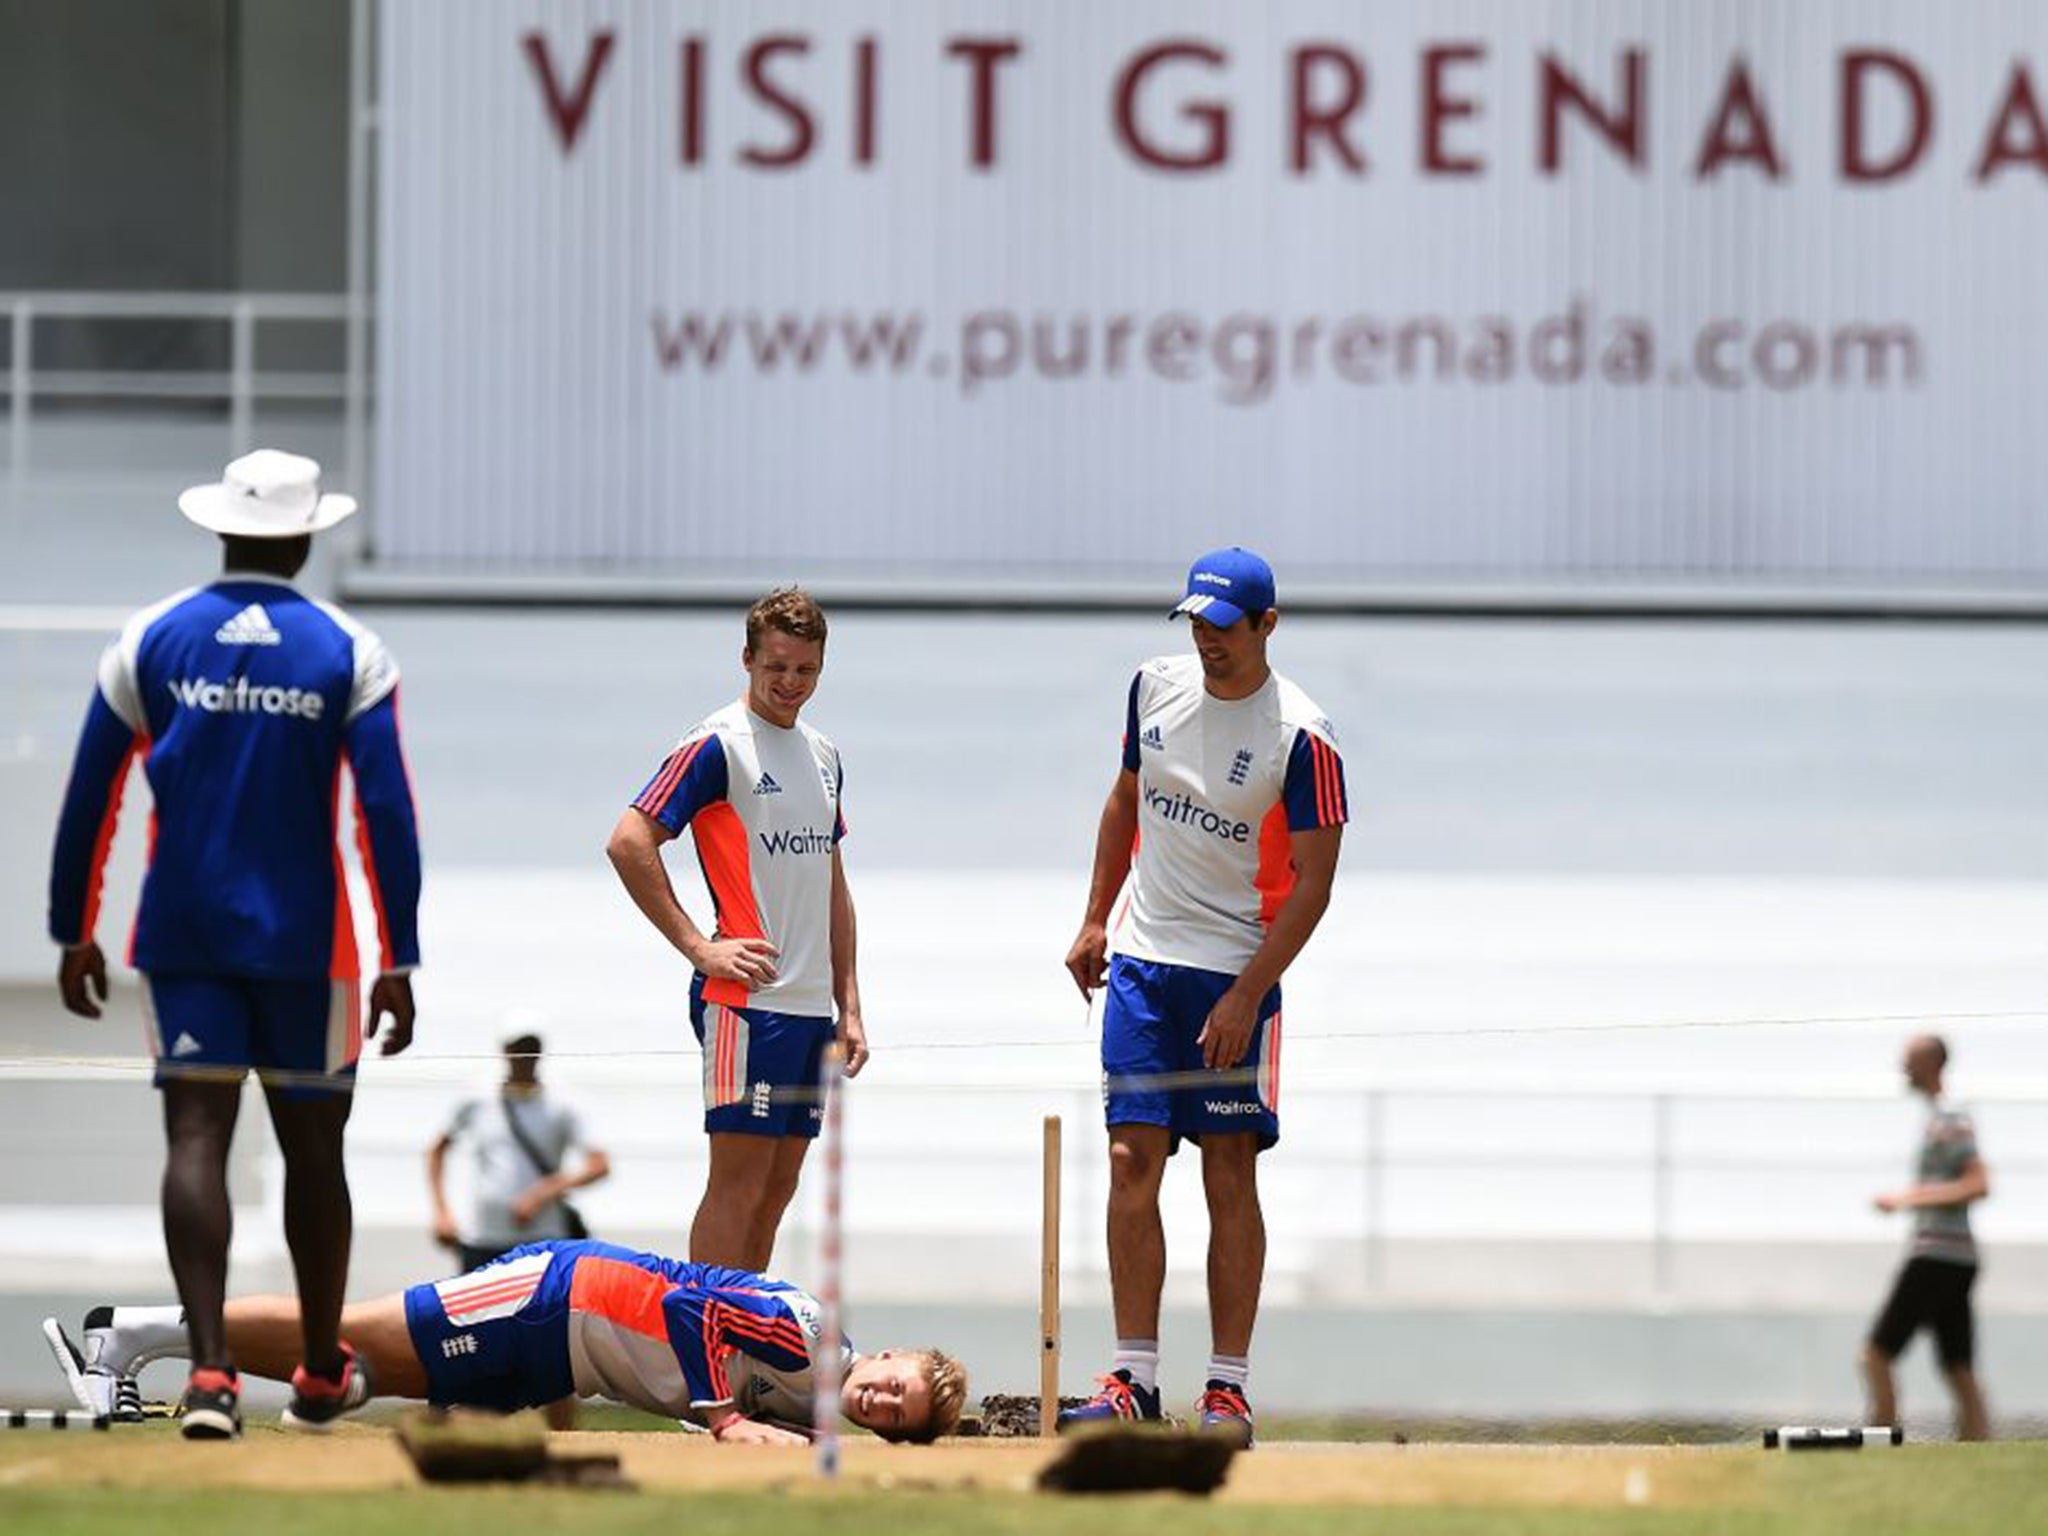 Joe Root takes a close look at the wicket and relays his findings to his under-pressure captain Alastair Cook, right, Jos Buttler, centre, and bowling coach Ottis Gibson